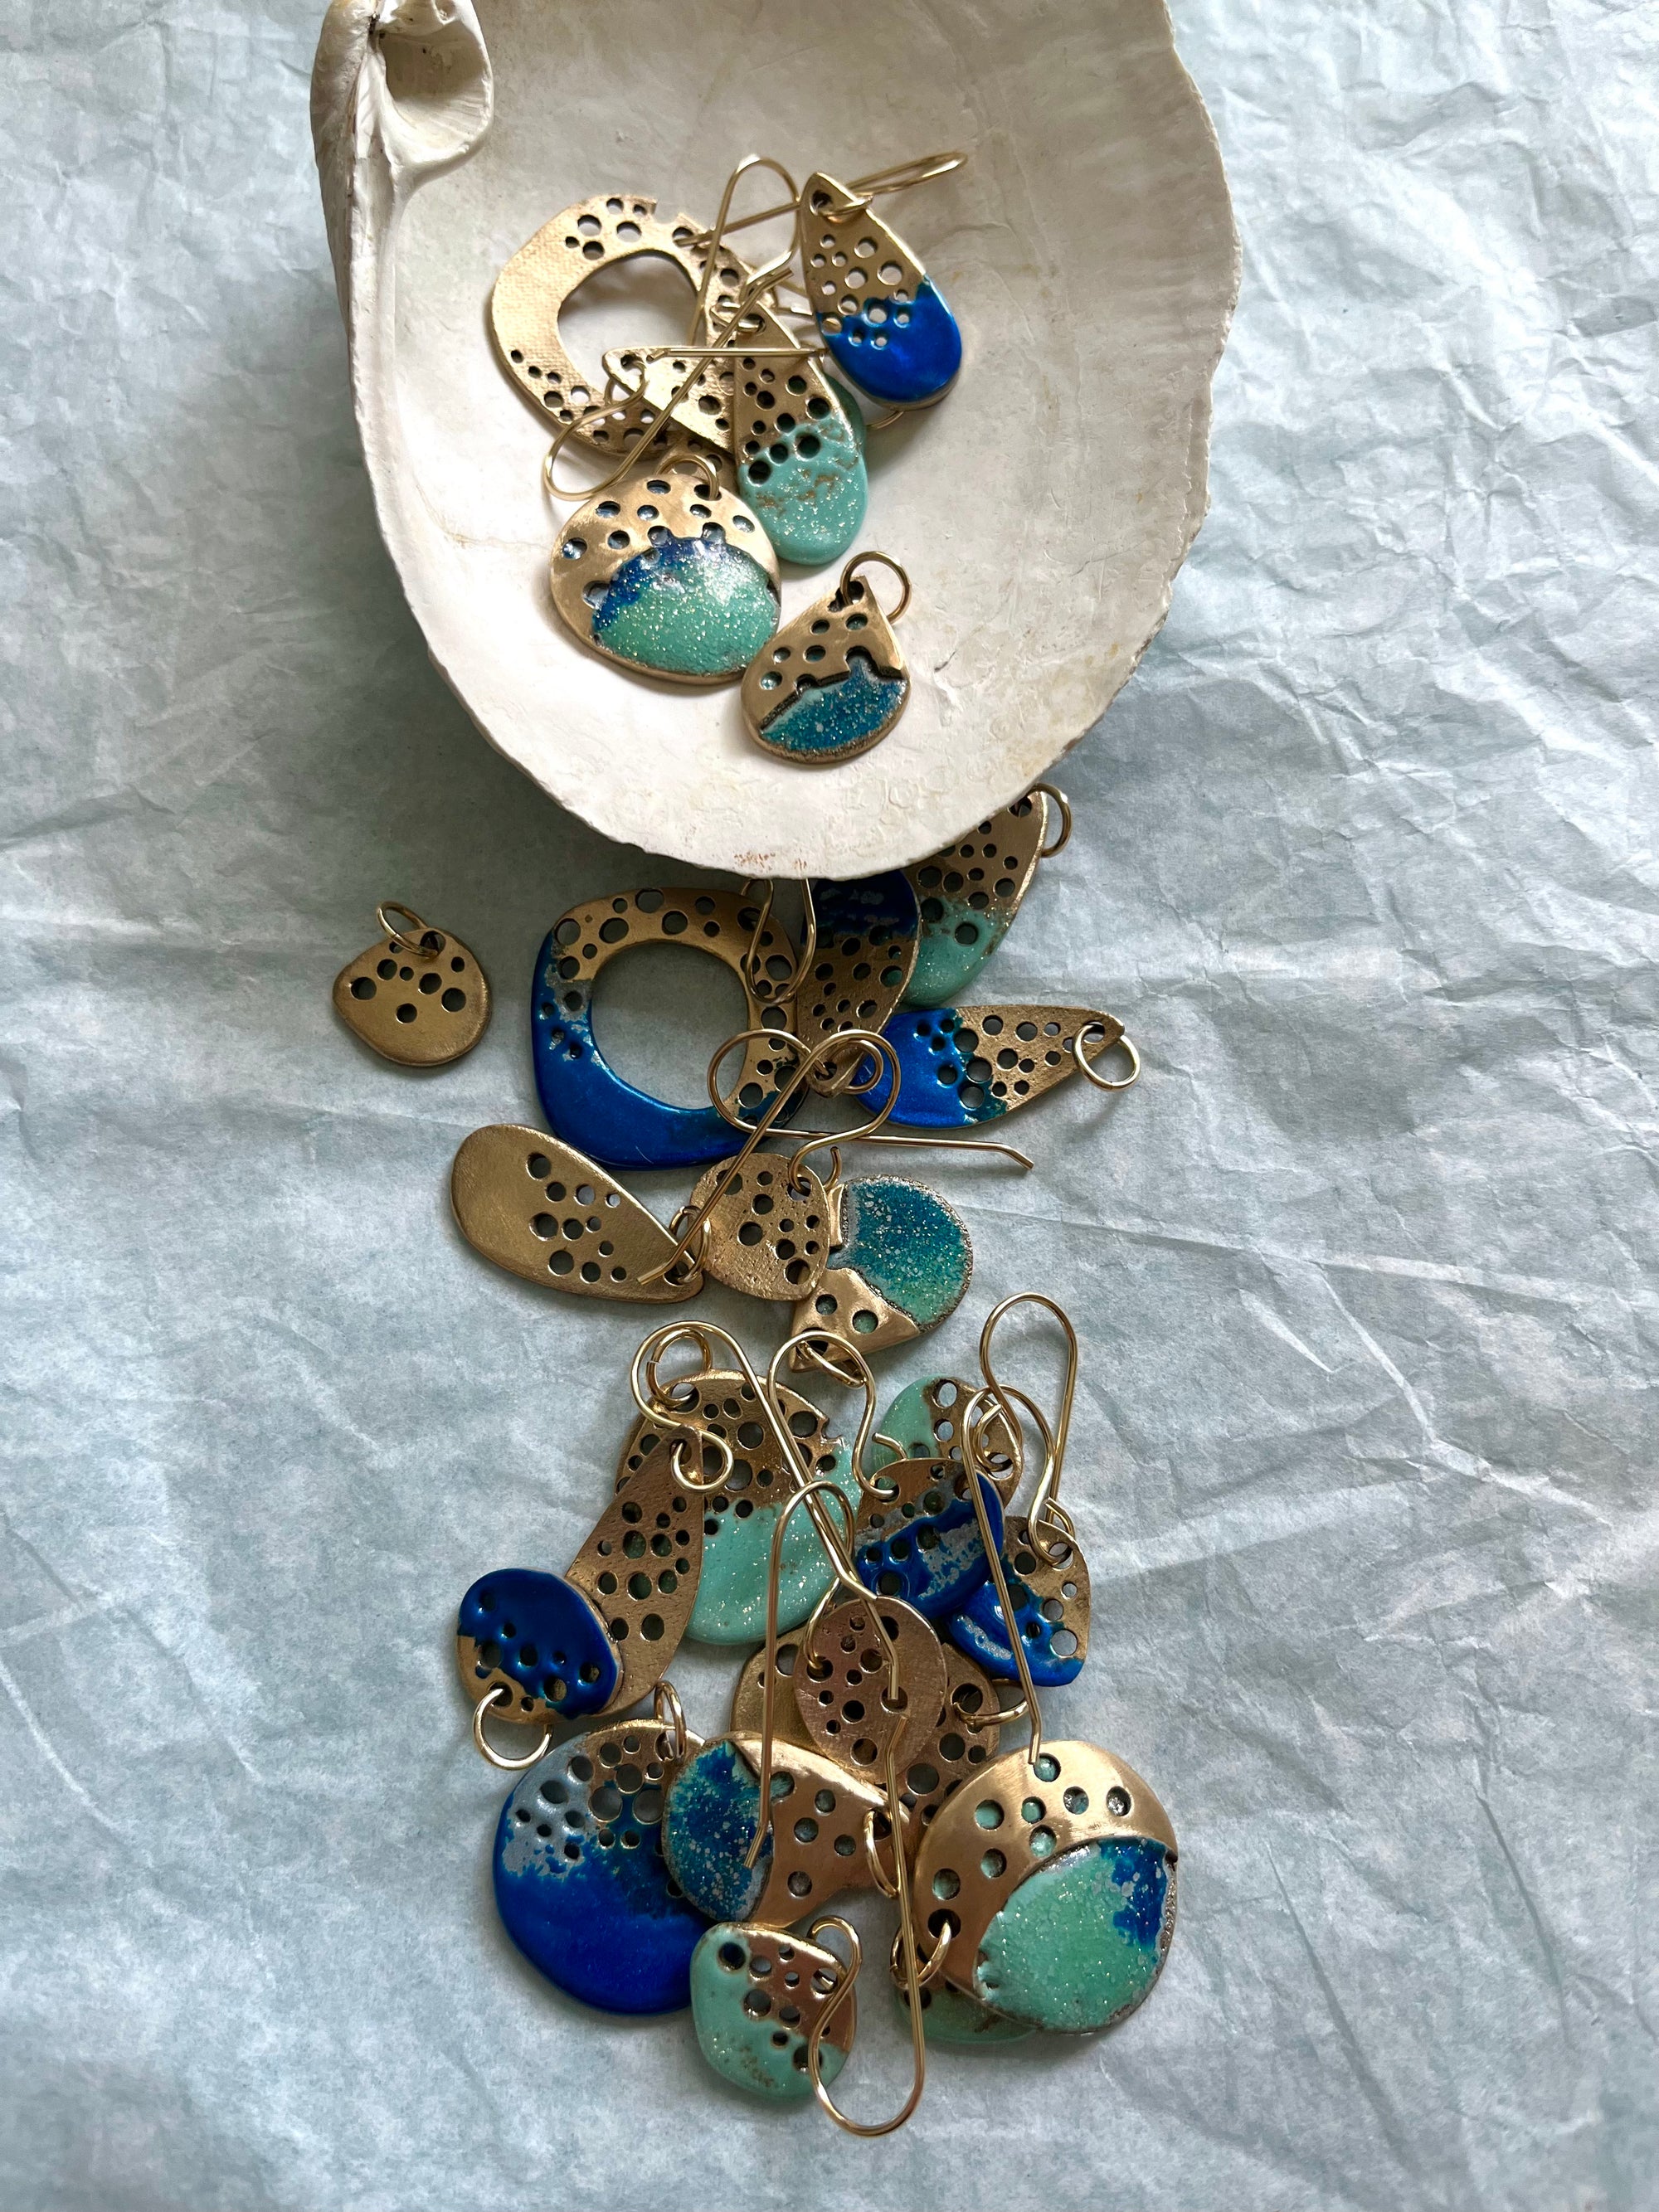 Ocean coloured bronze jewelry pieces tumbling from a seashell.